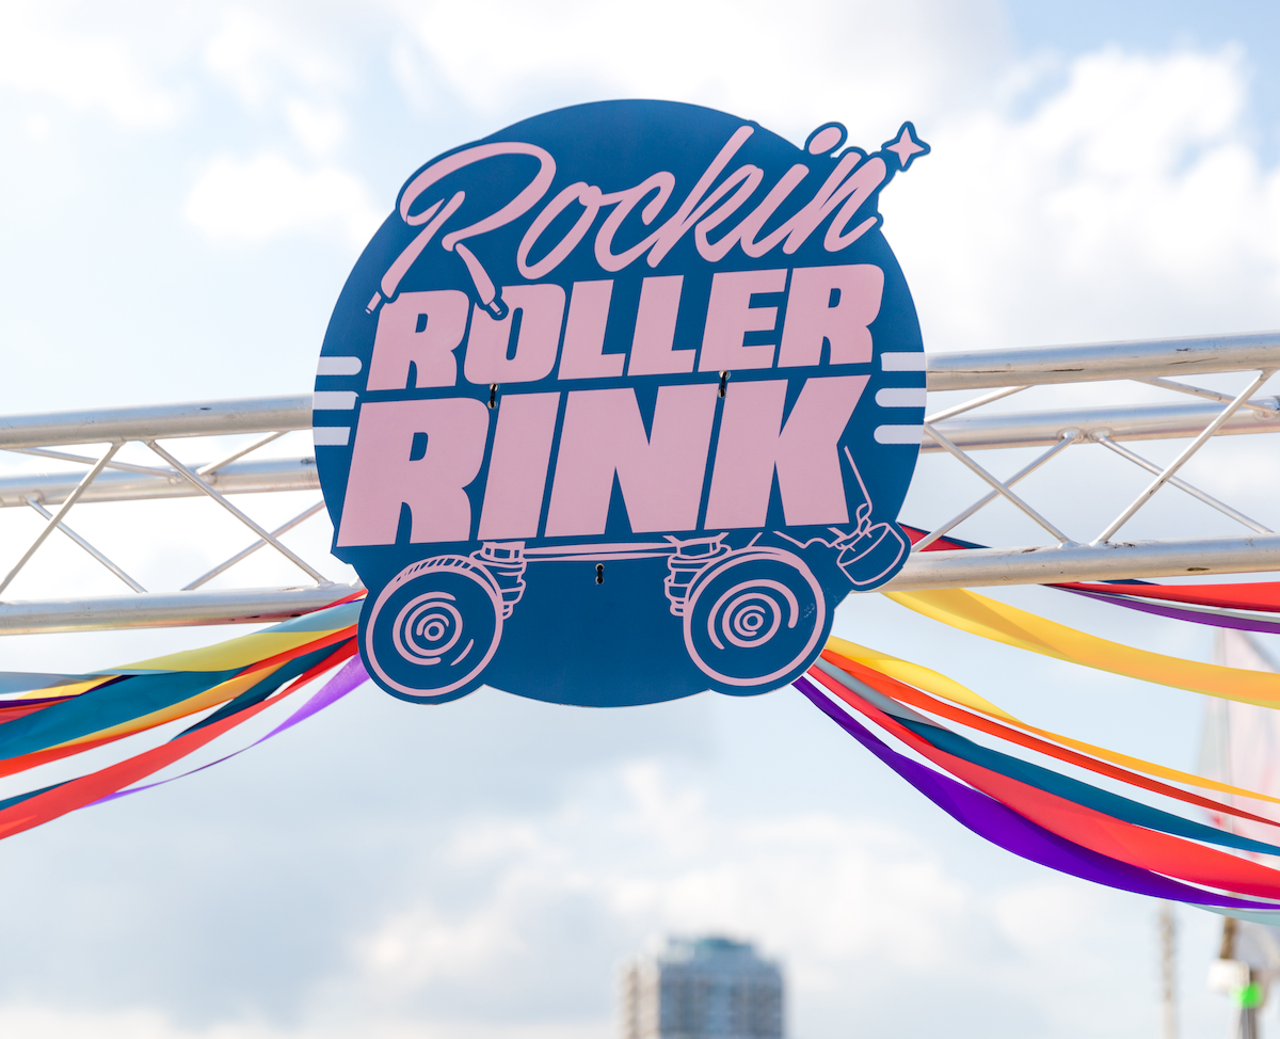 St Pete Roller Rink will be on the St. Pete Pier from March 8-April 14.